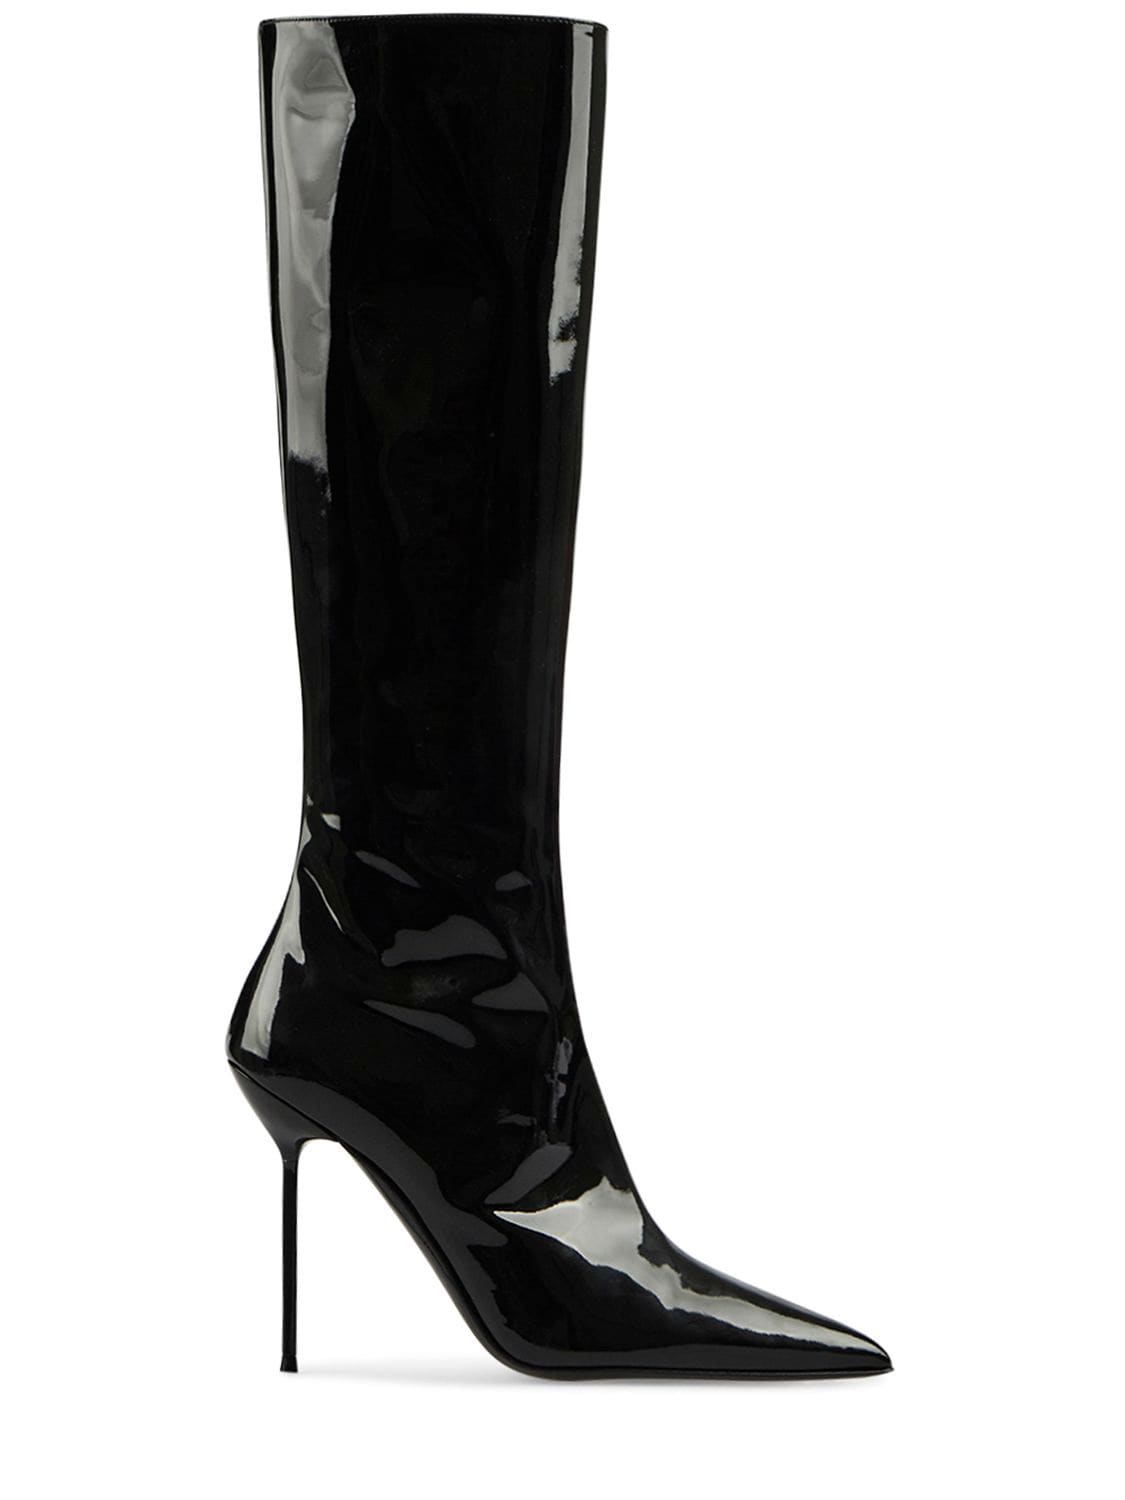 Paris Texas 105mm Lidia Patent Leather Boots In Black